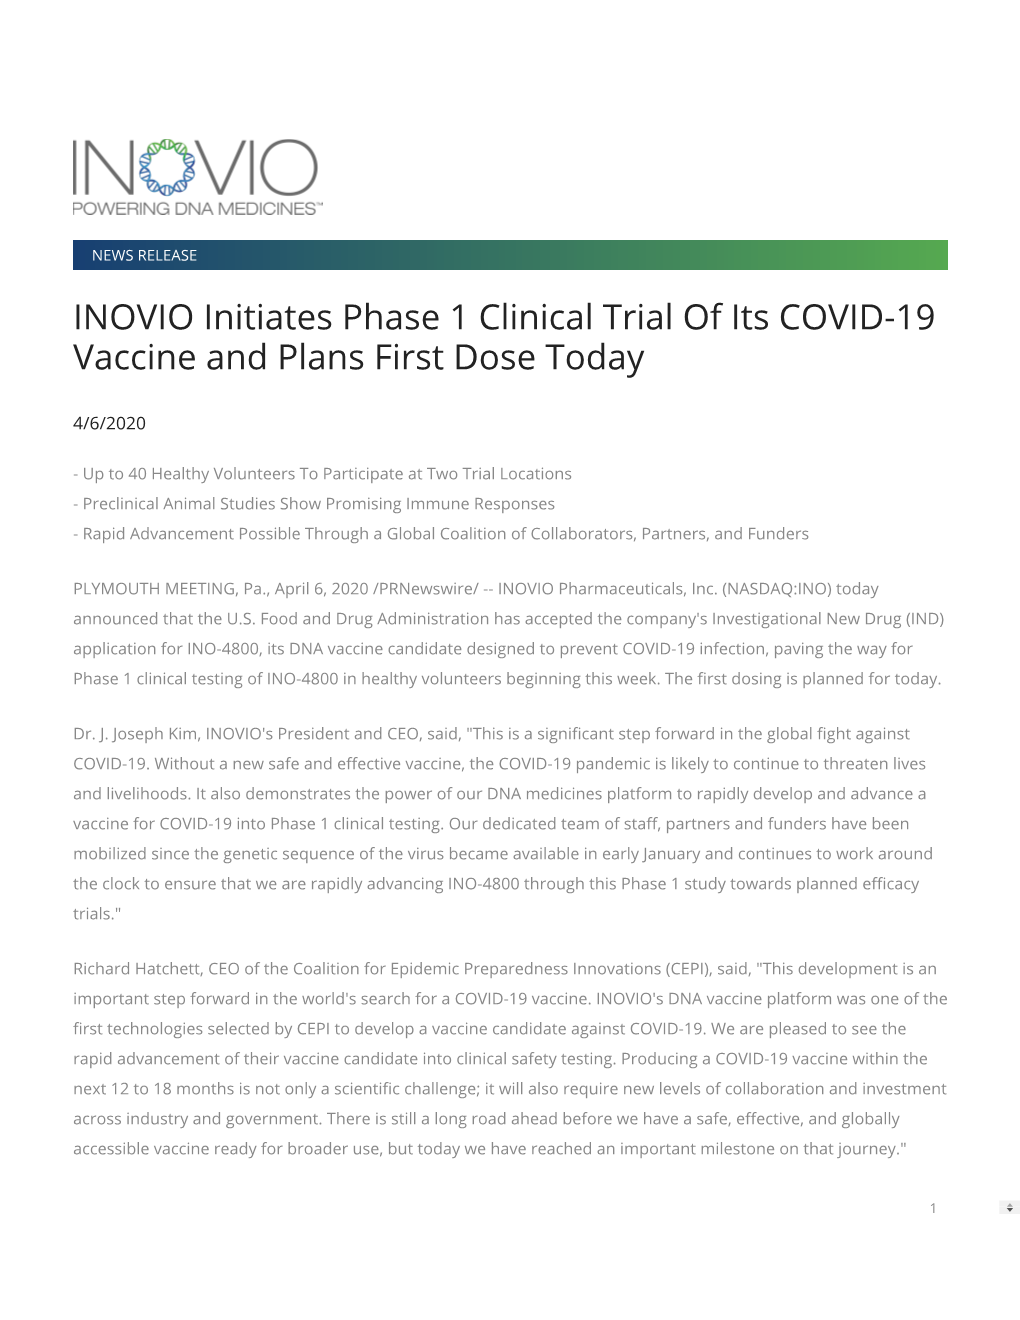 INOVIO Initiates Phase 1 Clinical Trial of Its COVID-19 Vaccine and Plans First Dose Today